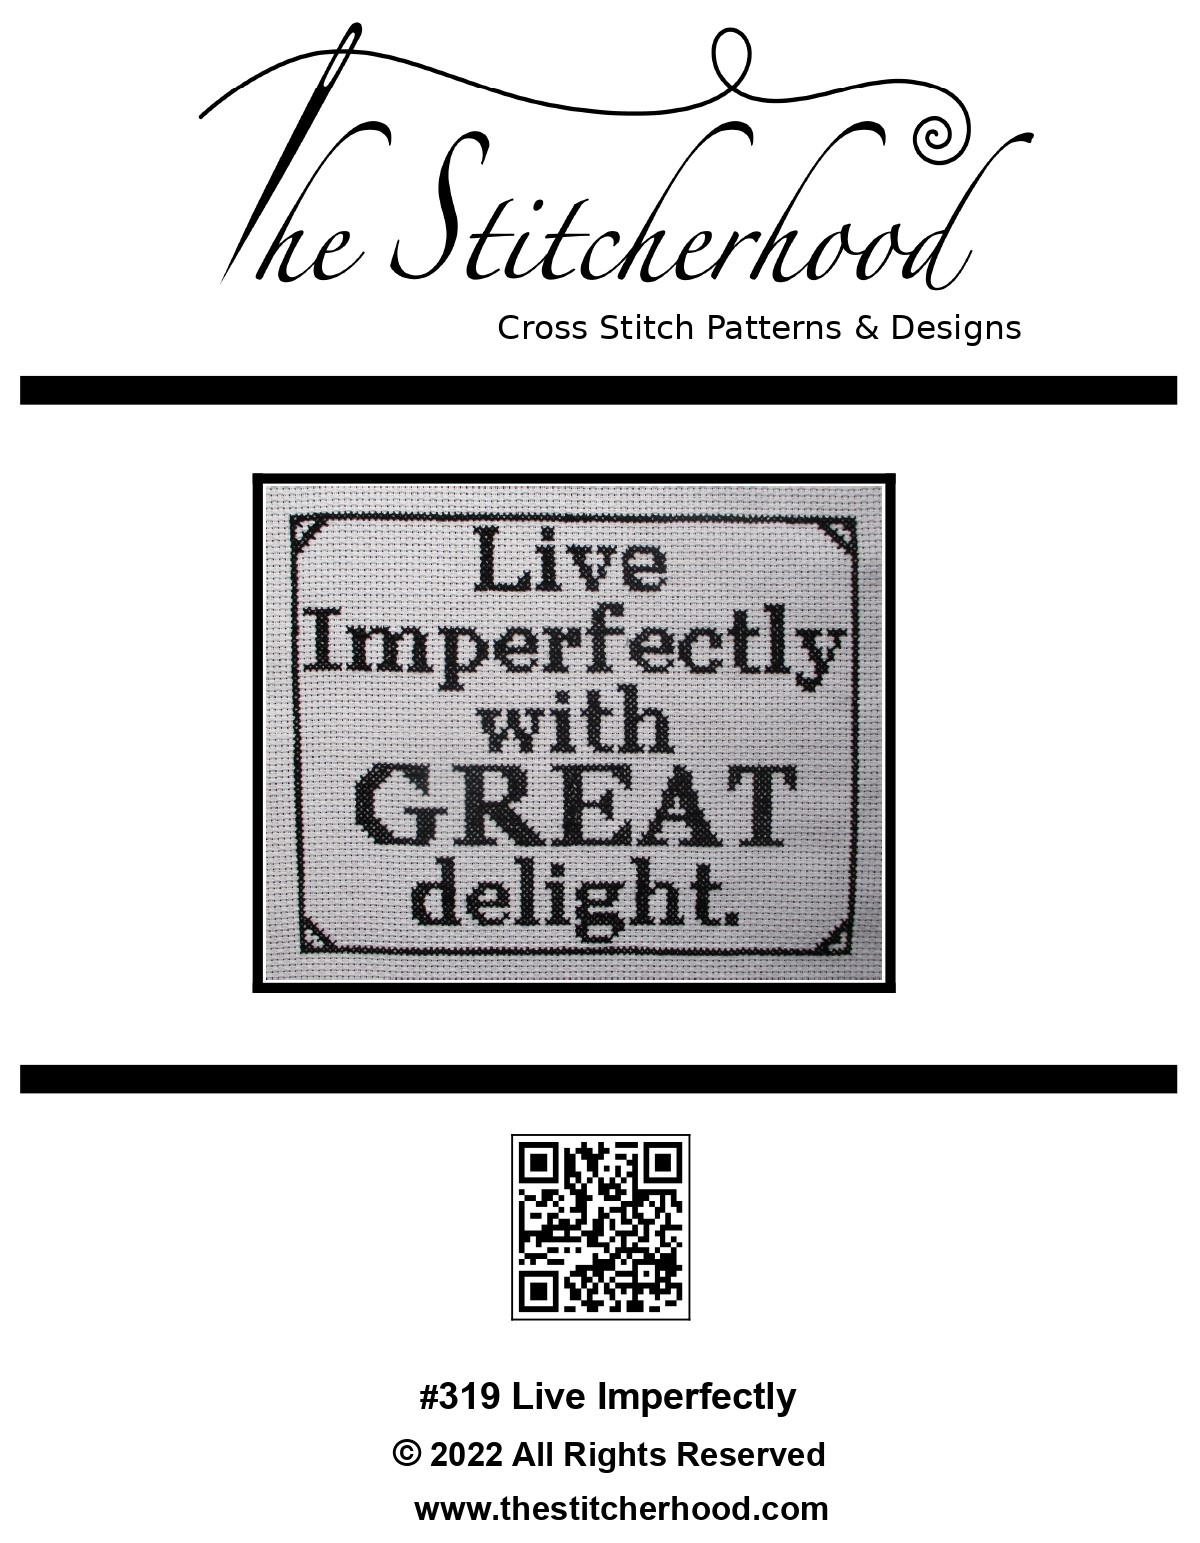 Live Imperfectly funny Cross Stitch Design